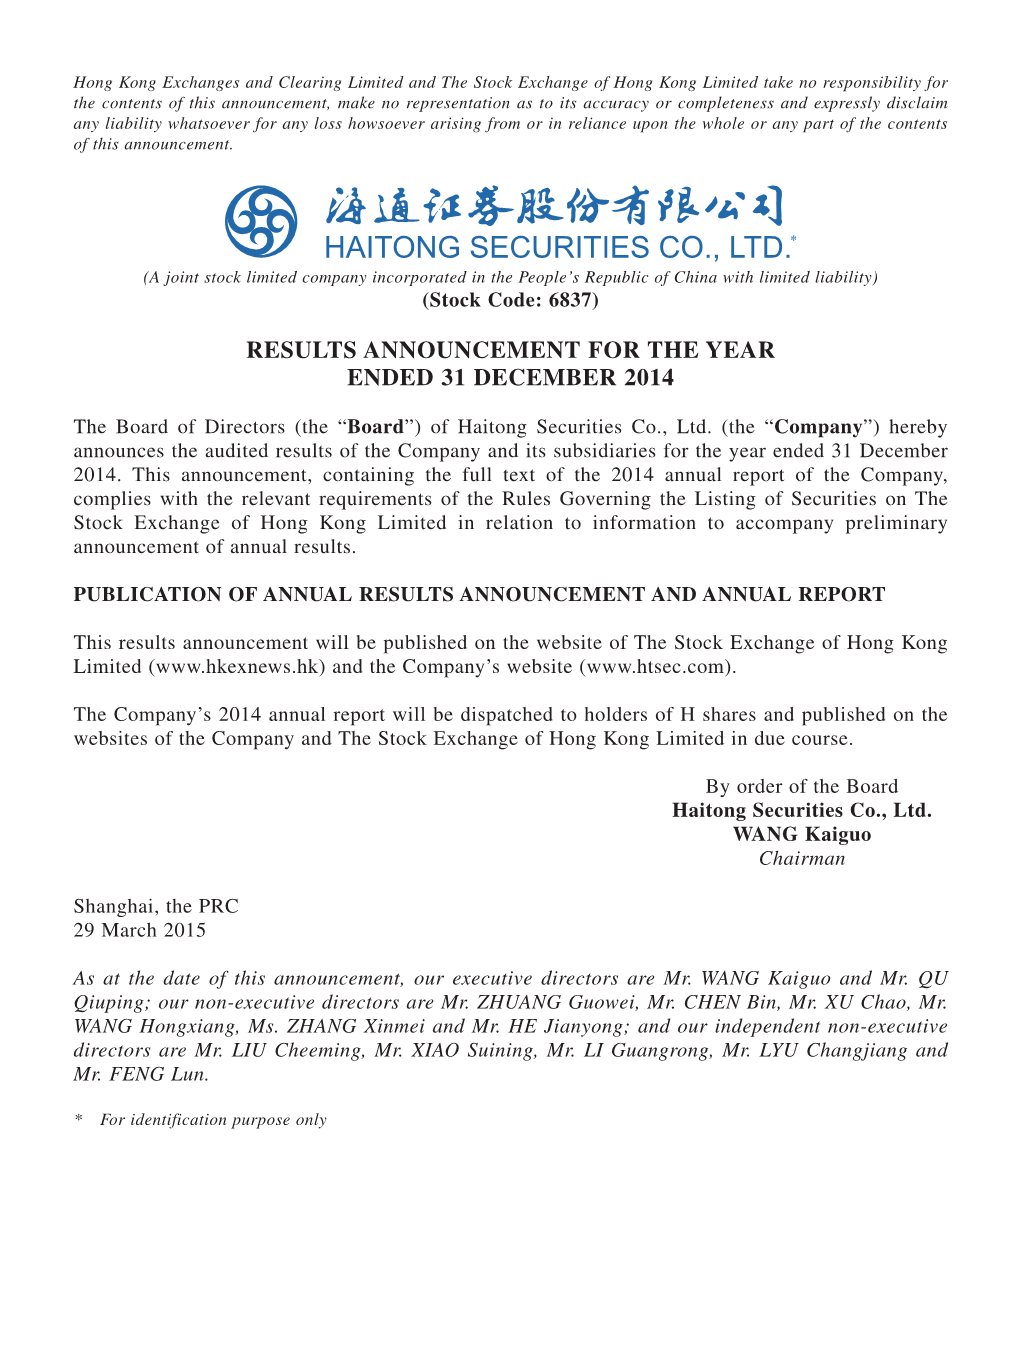 Results Announcement for the Year Ended 31 December 2014